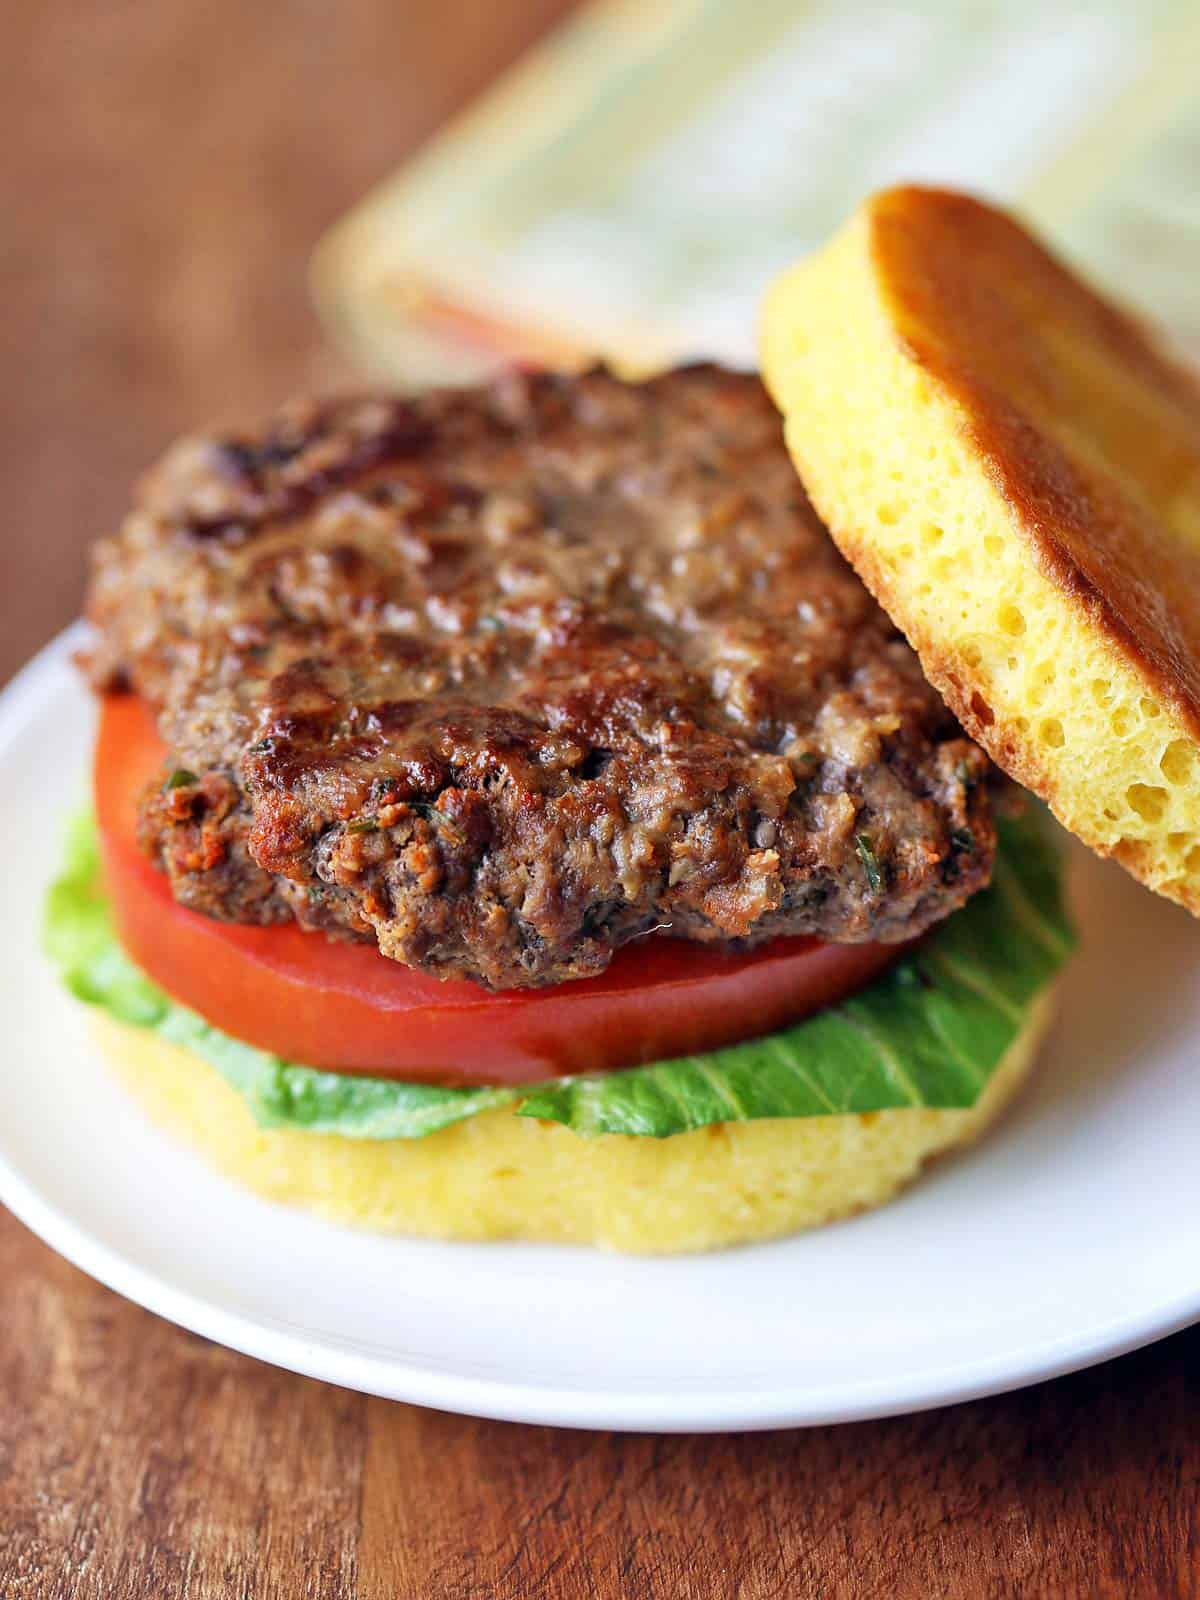 Bison burger served on a bun with lettuce and tomato. 